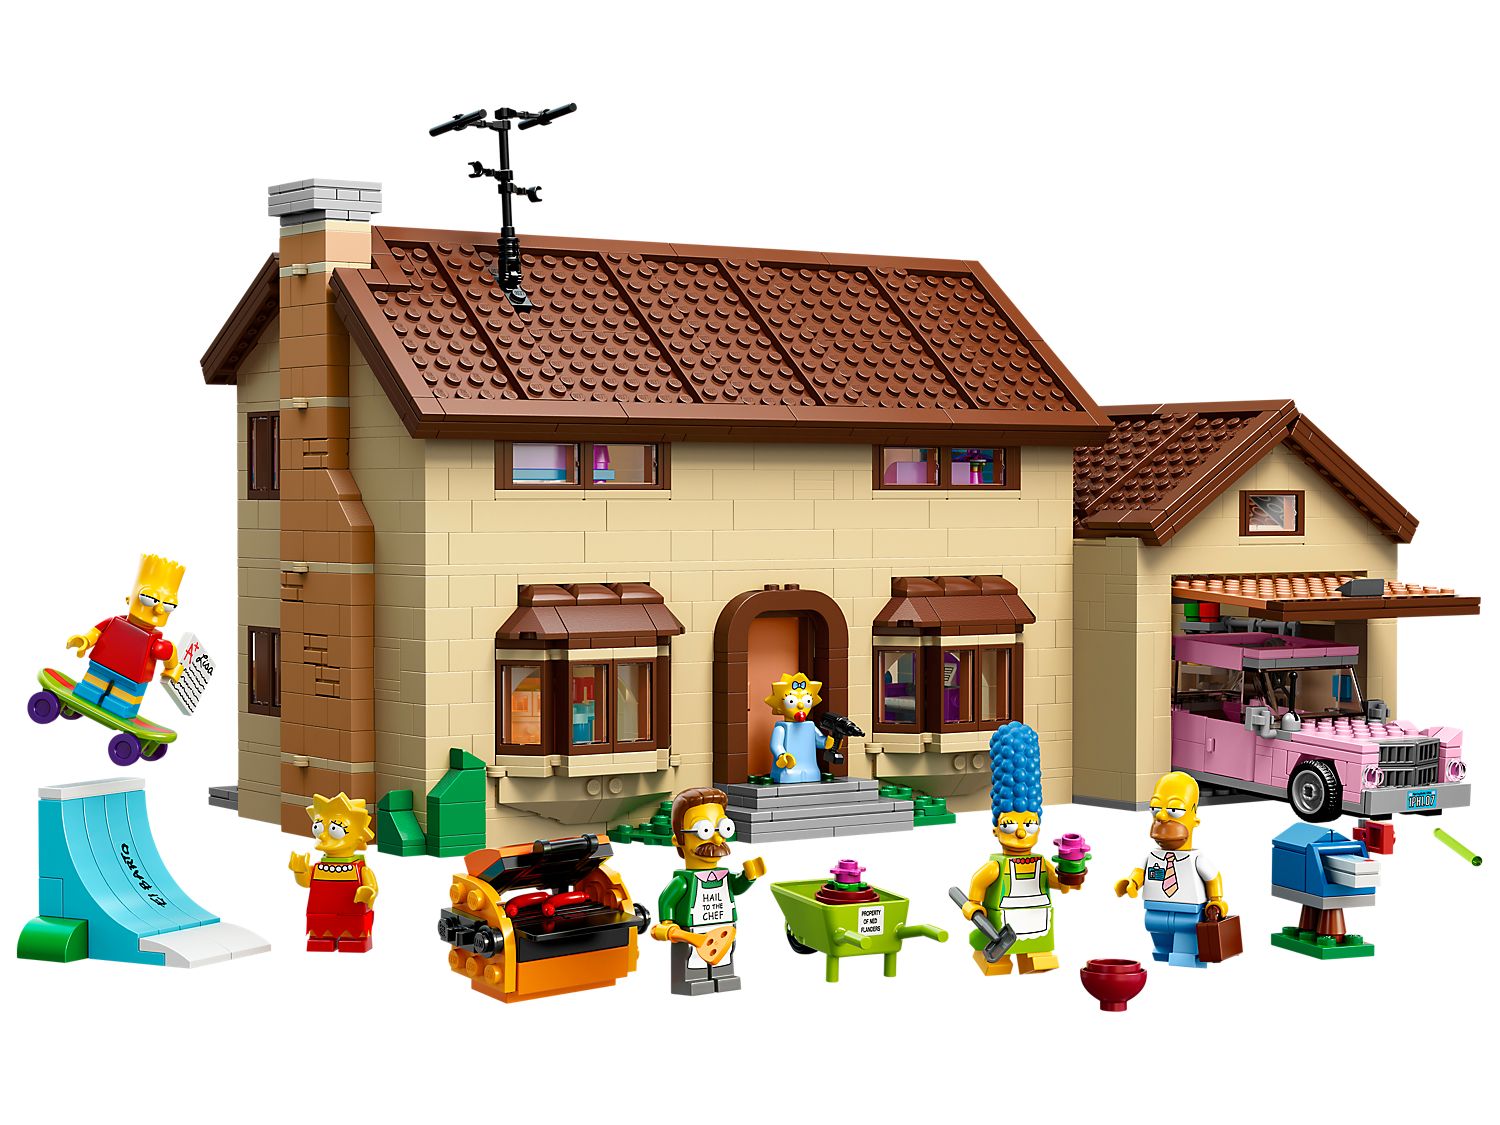 LEGO The Simpsons: The Simpsons House - 71006